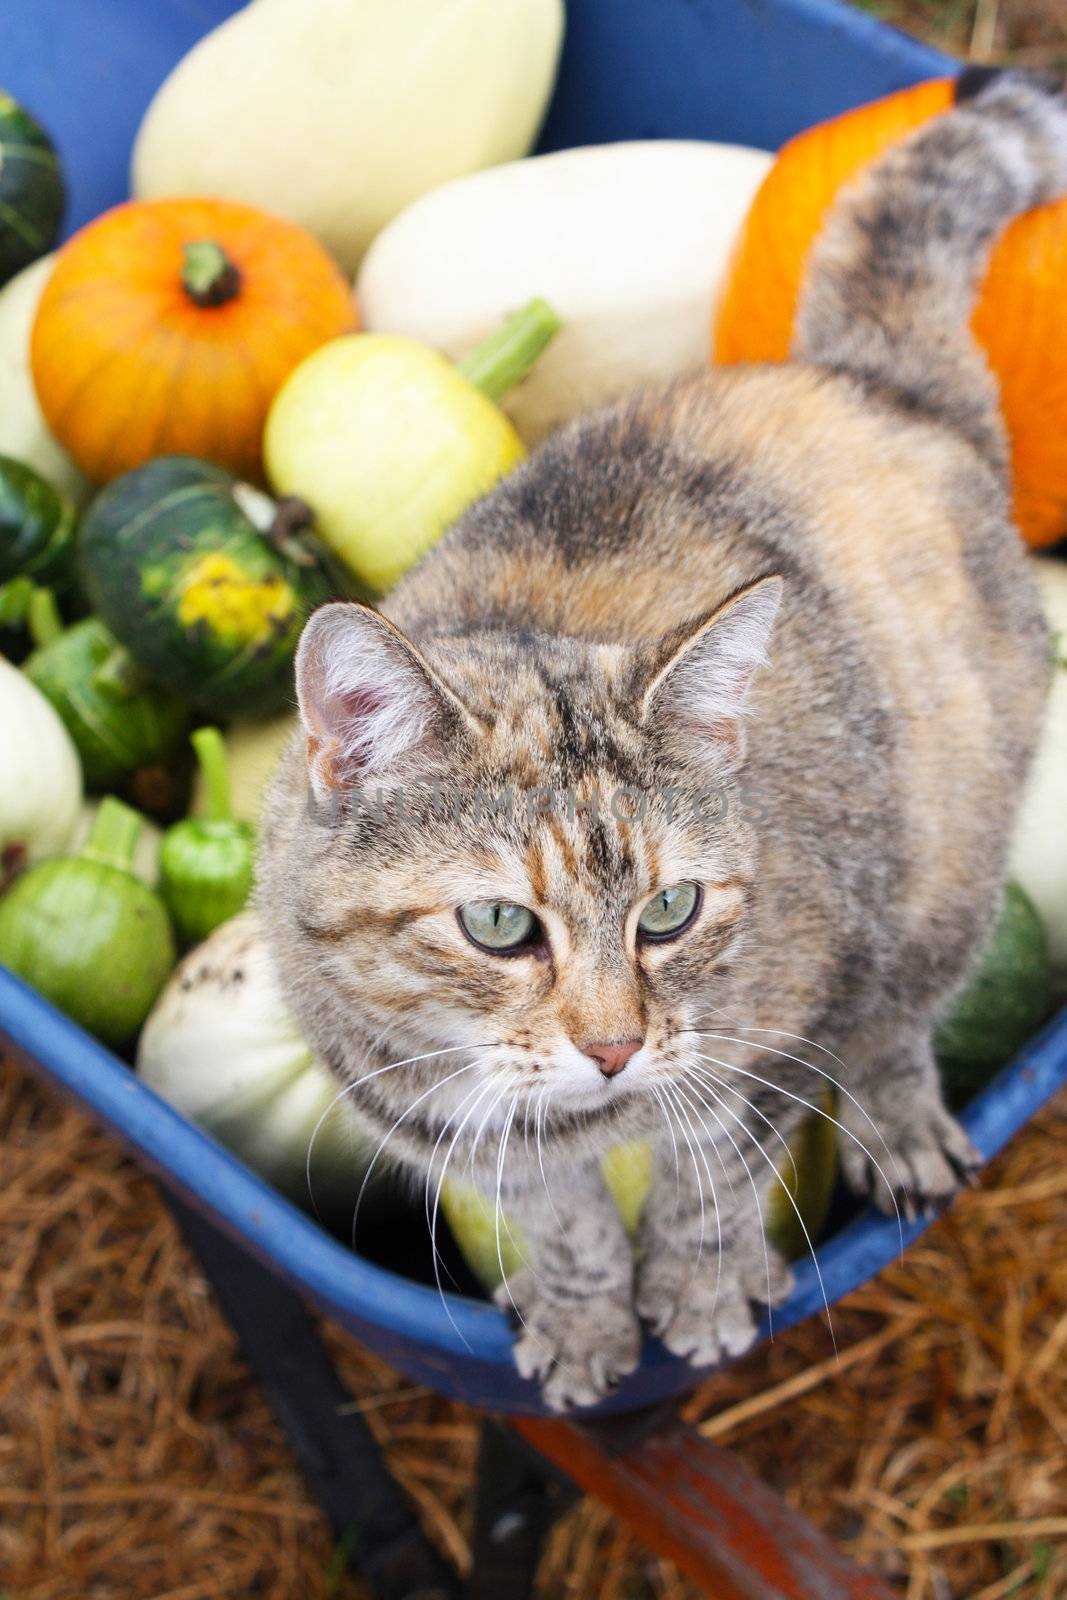 An image of a variety of organic heirloom winter squashes, including pumpkins, in a blue wheelbarrow.  A cat is balanced on the edge of the wheelbarrow, and the focus is on the cat.